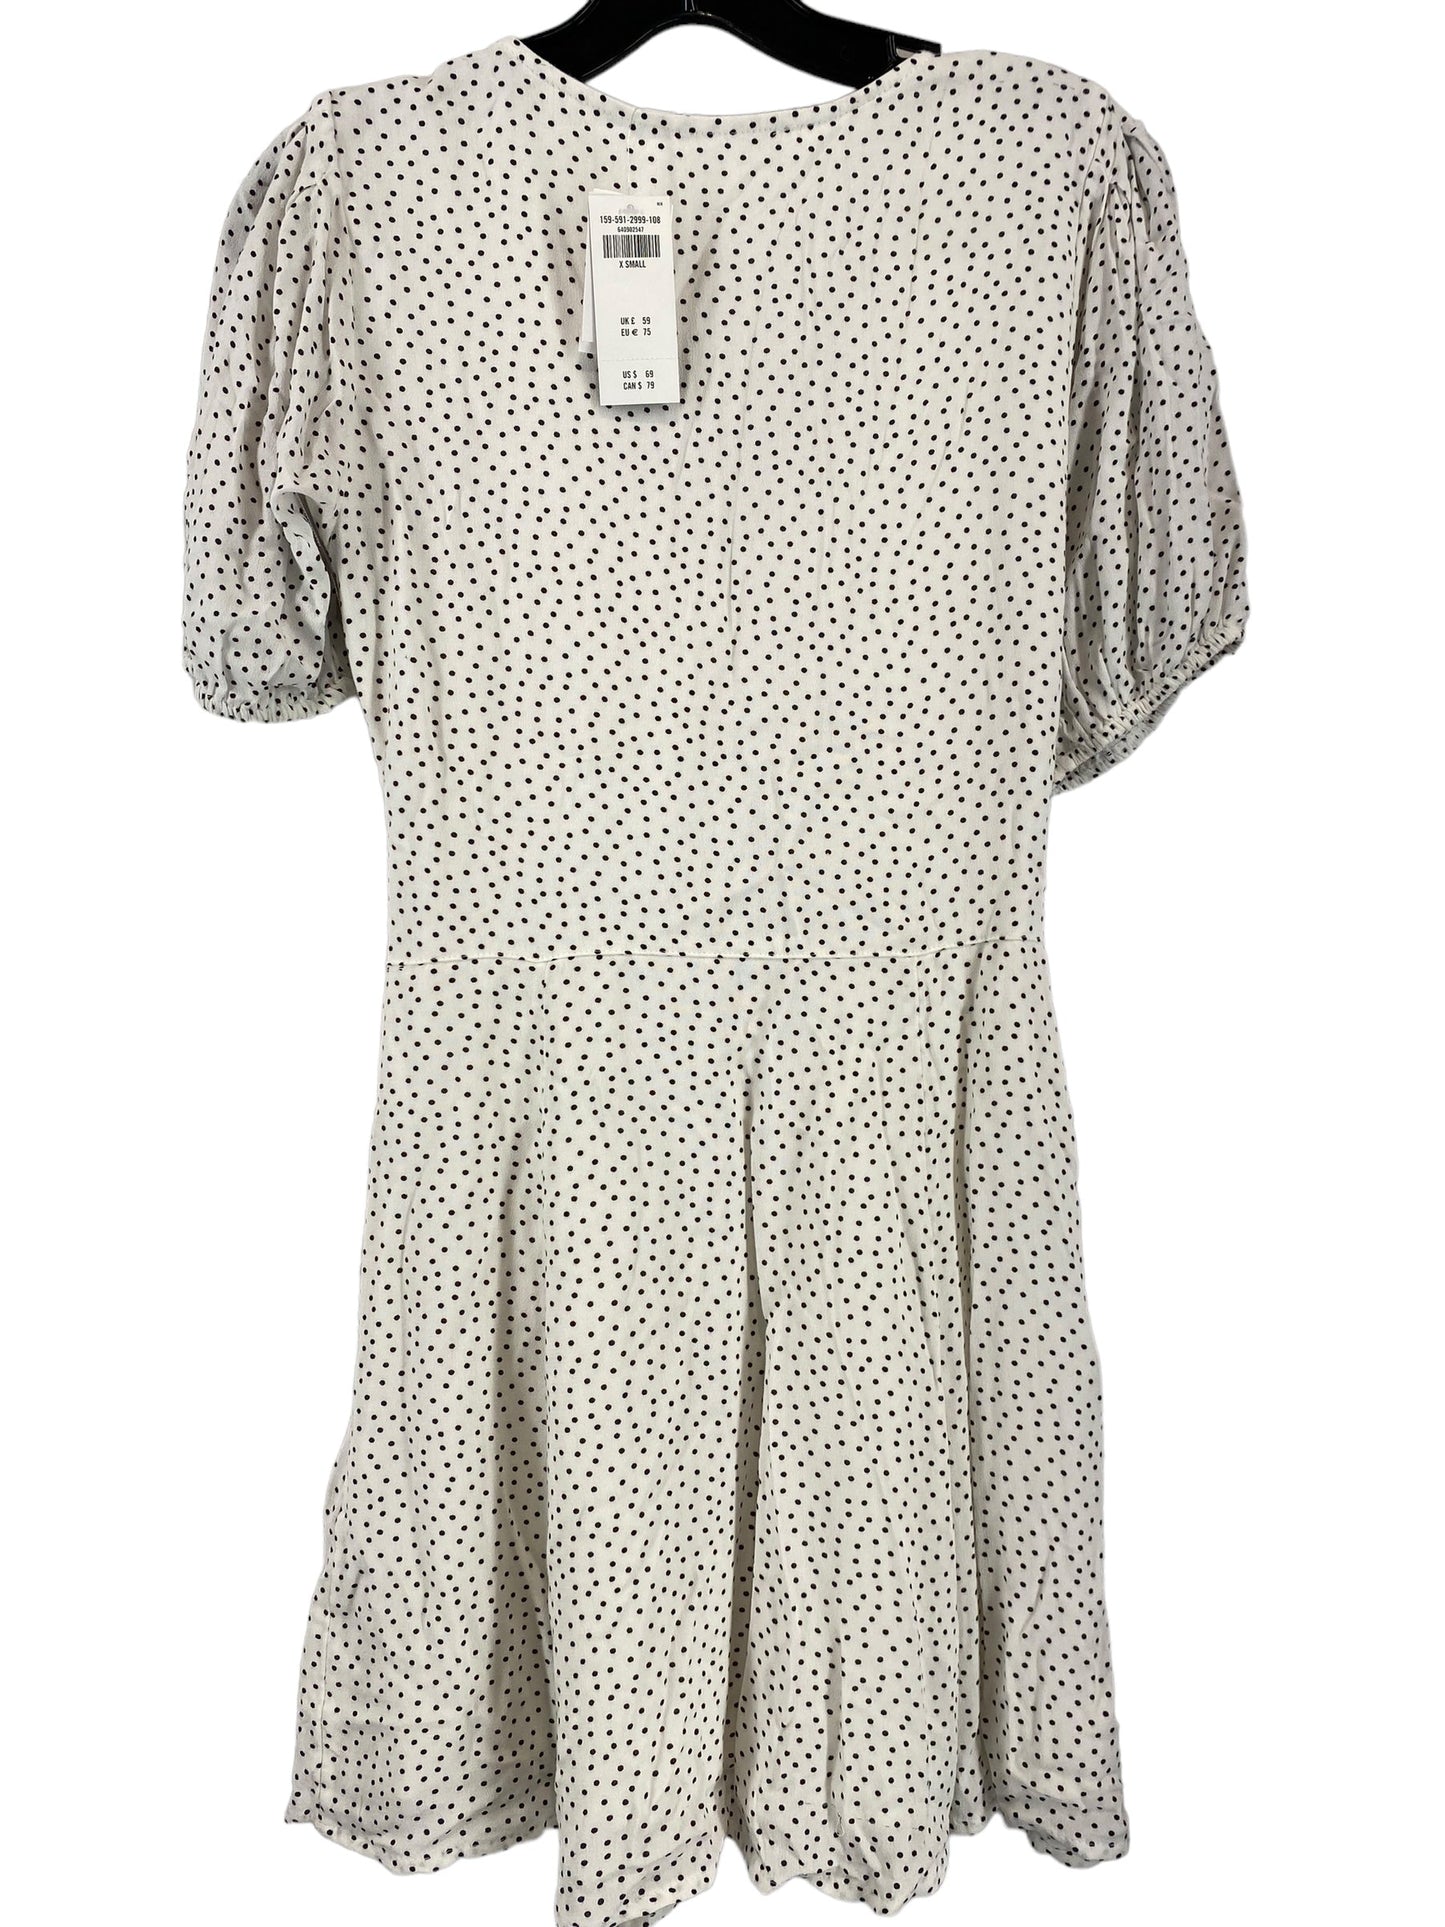 Dress Casual Short By Abercrombie And Fitch  Size: Xs